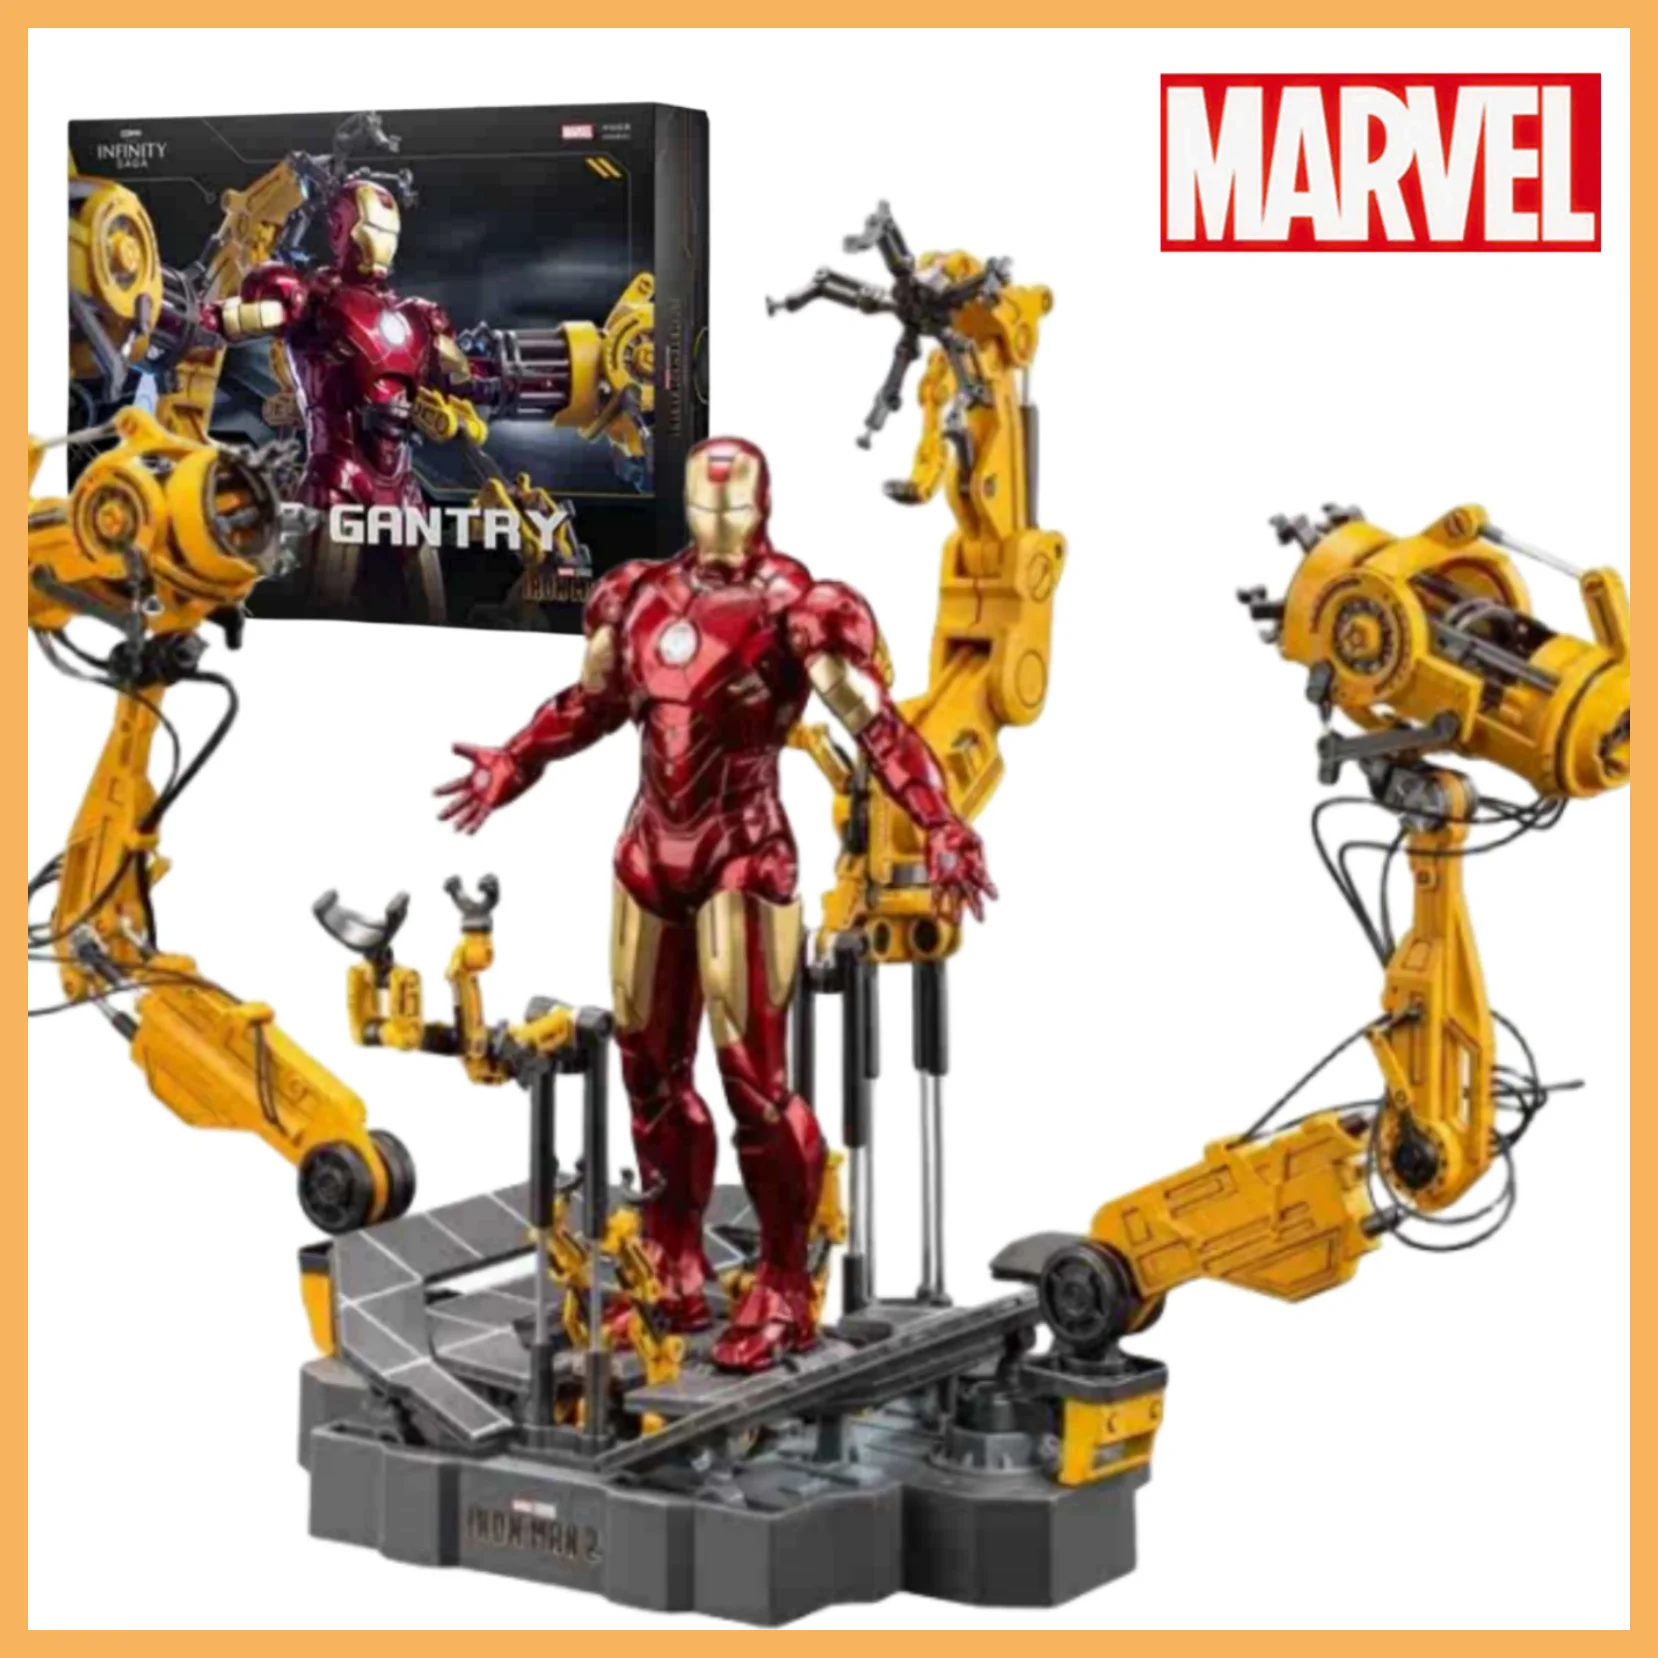 

In Stock Marvel Zd Iron Man Mk4 With Suit-up Gantry Original 1/10 Tony Stark Model Action Figure Collectible Toys Xmas Gift